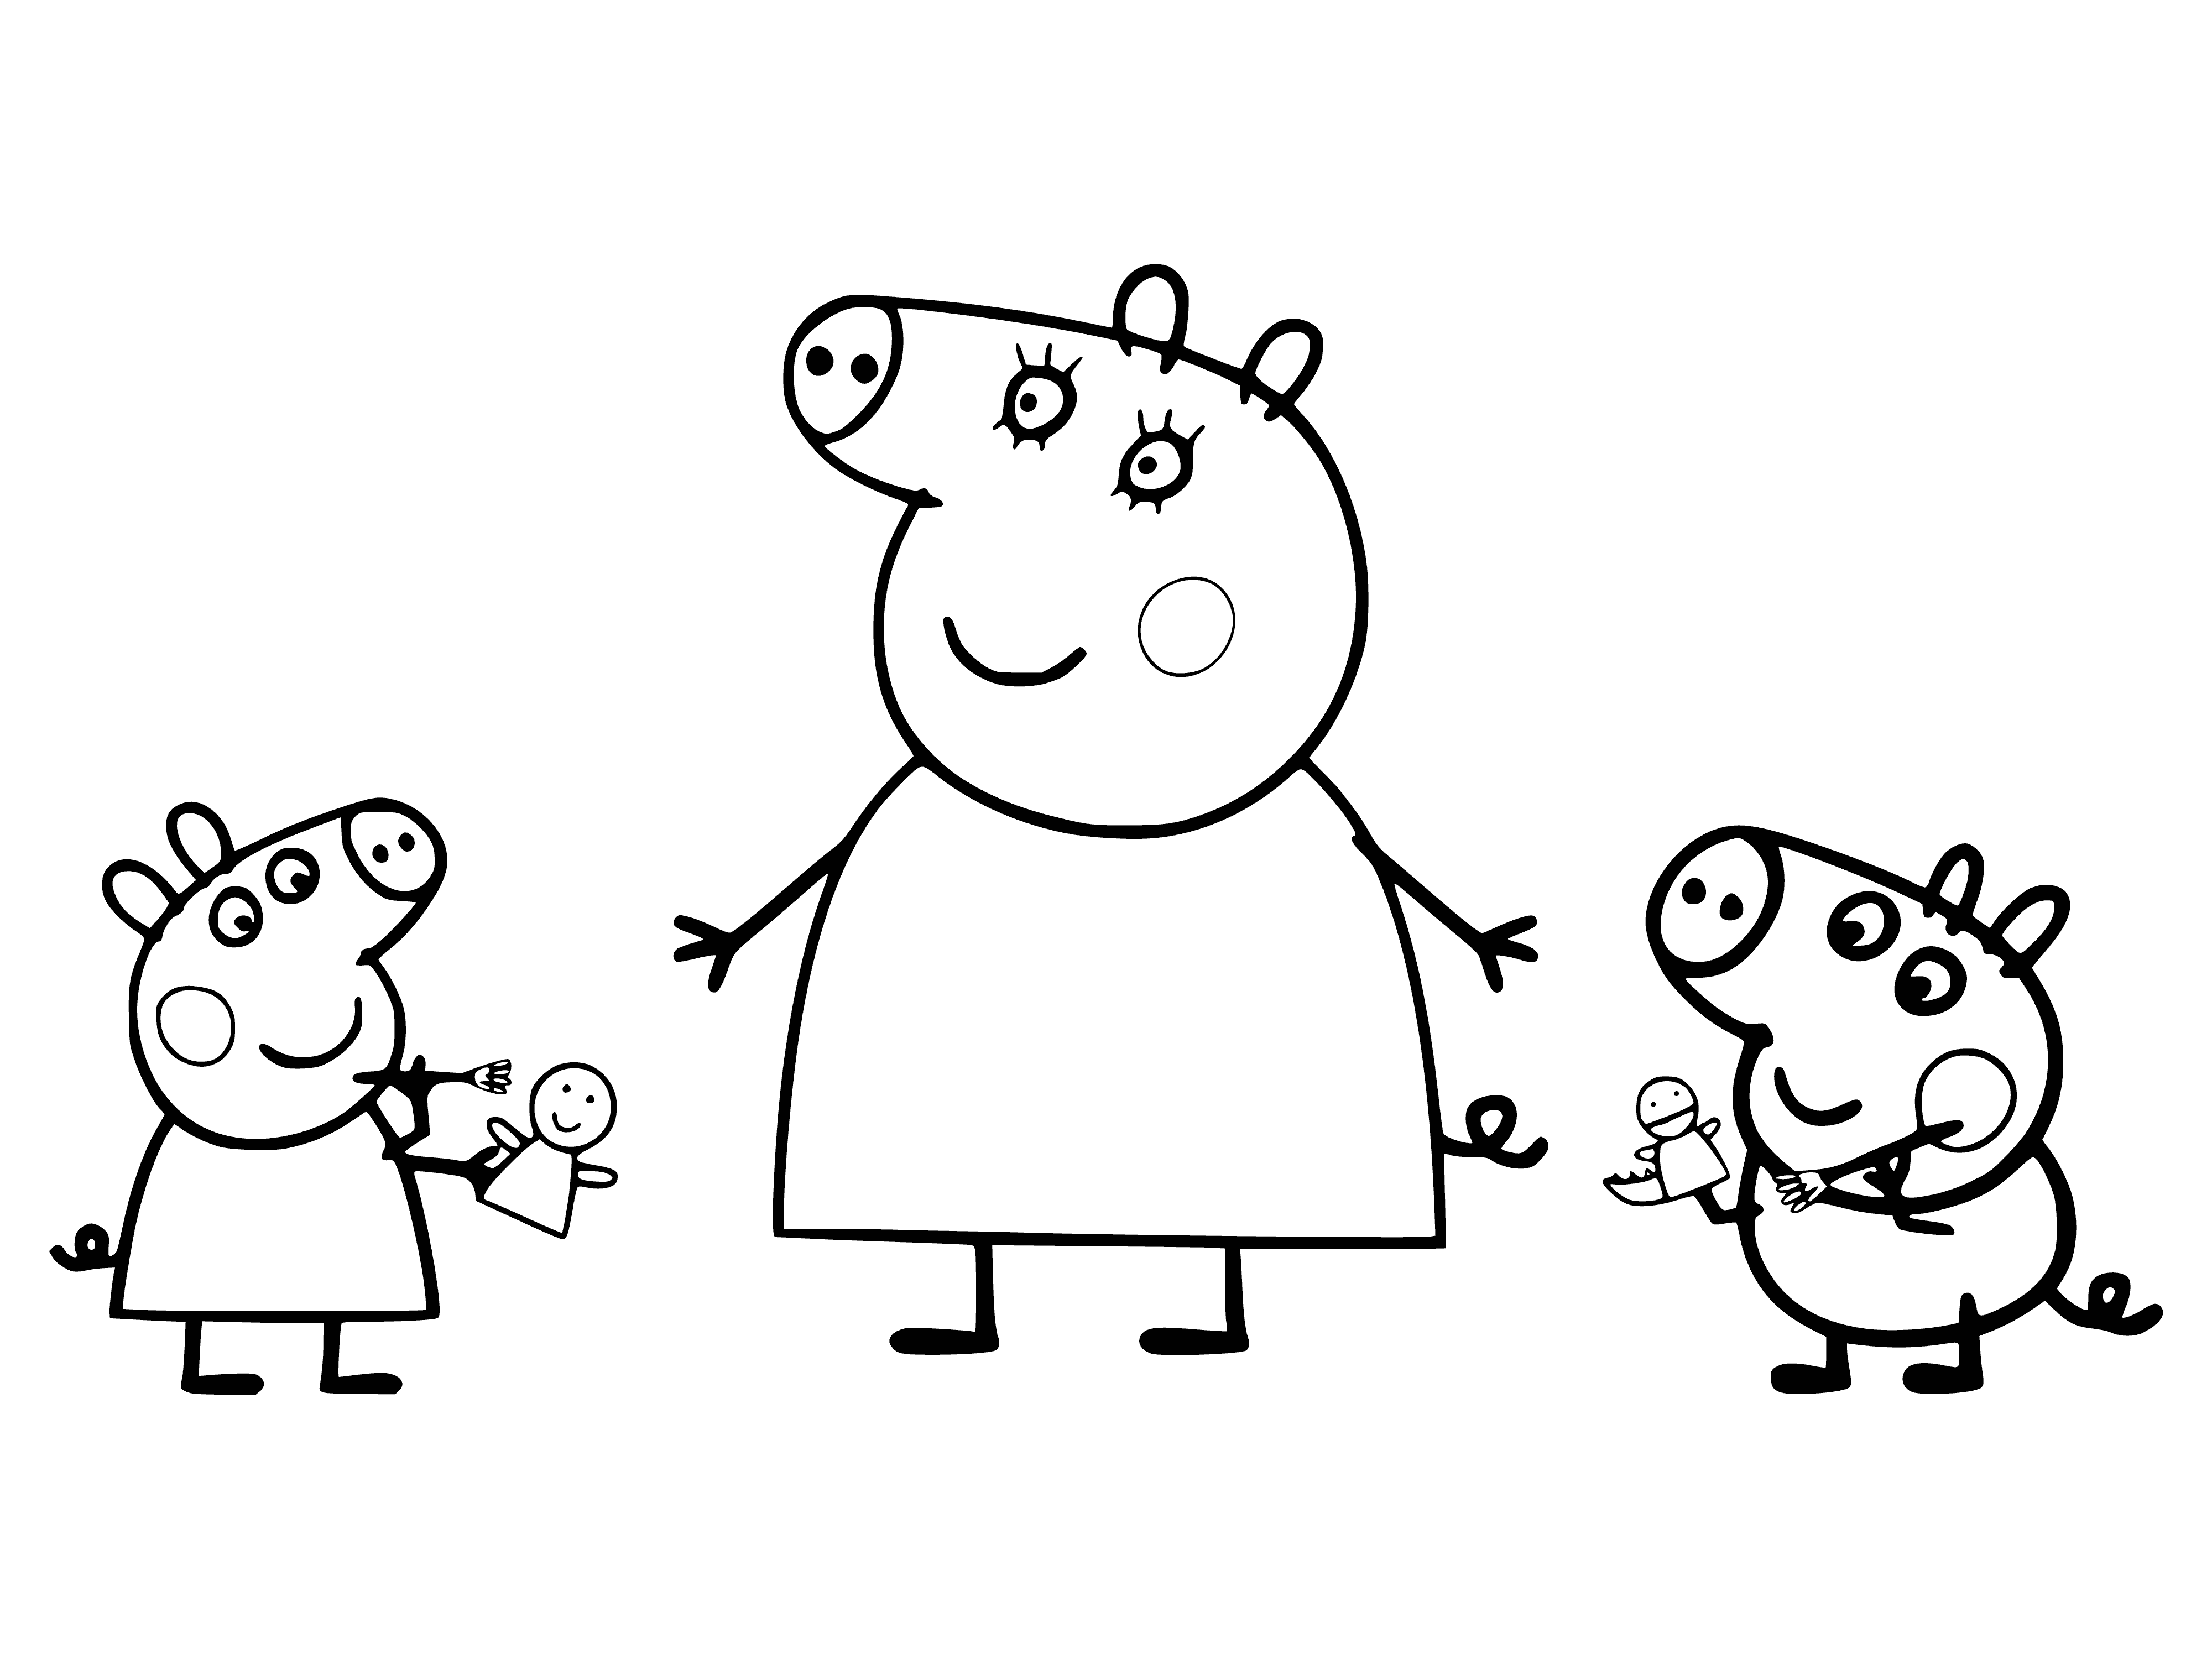 coloring page: 3 pinks skin pigs: Peppa, Mom & George. Peppa's dress is frilly, Mom's plain, George wears shorts. George drives a blue car, Peppa and Mom standing beside it.